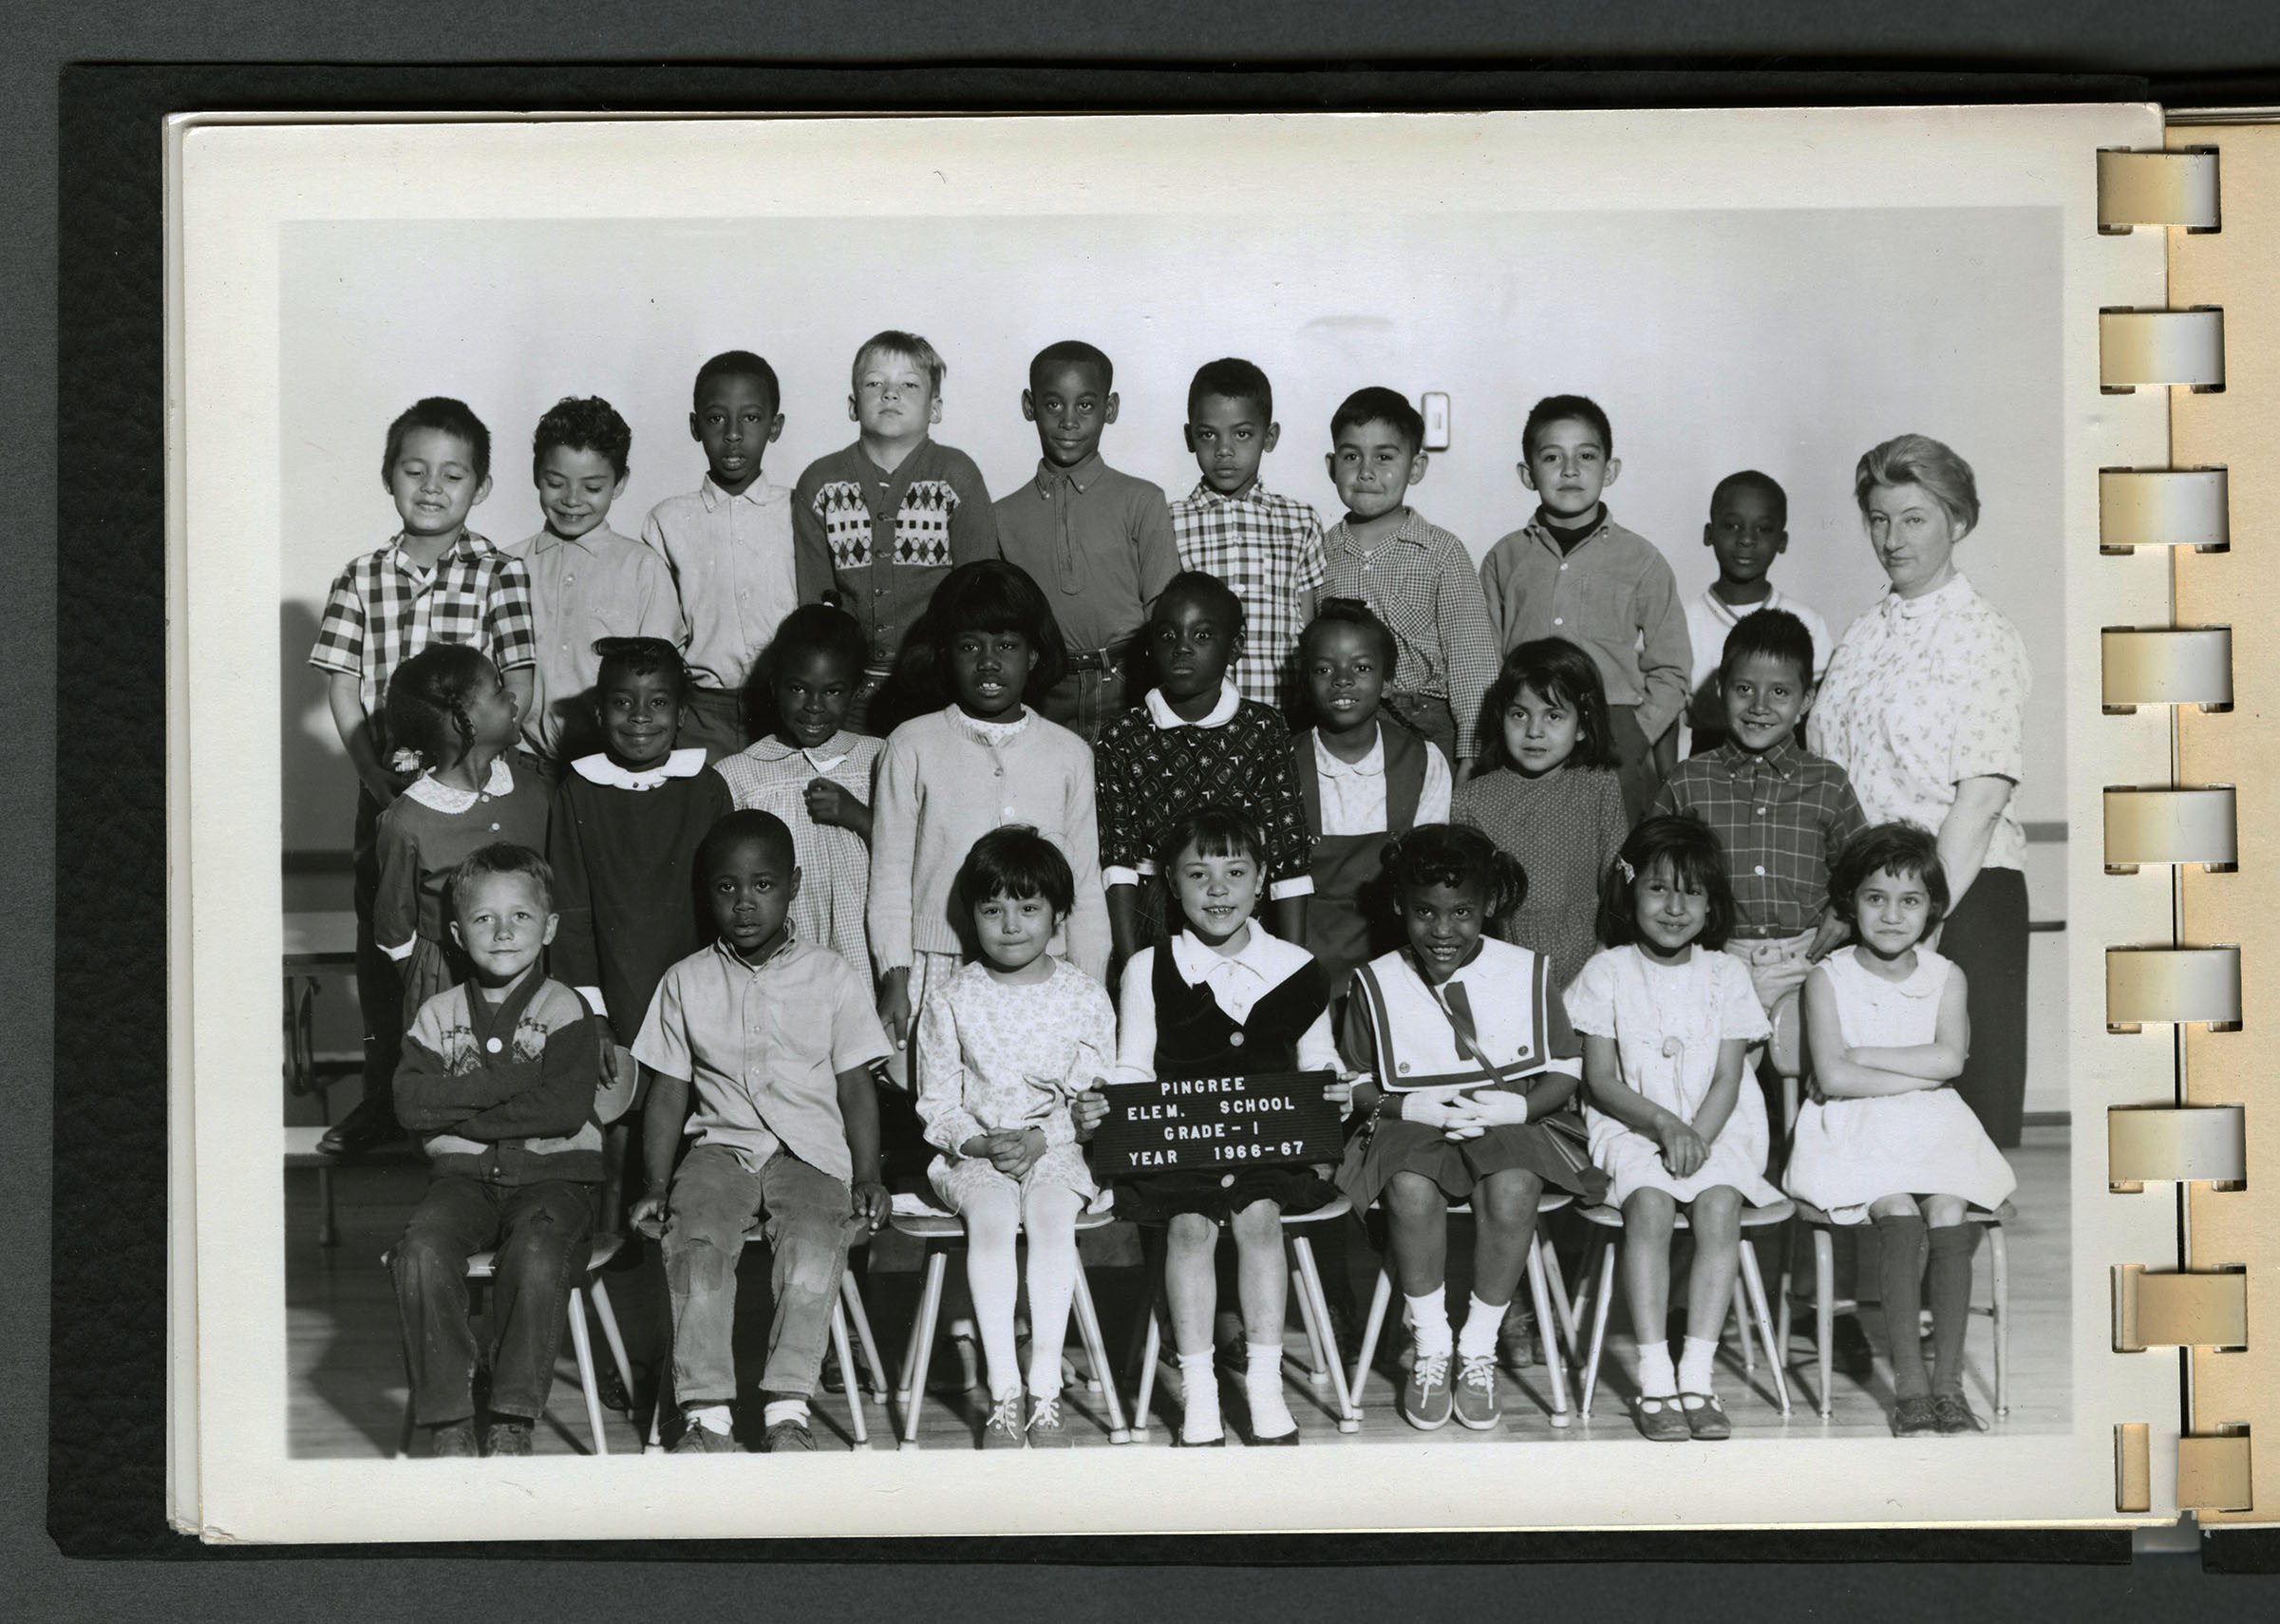 To show a 1st grade class from the 1966-67 school year